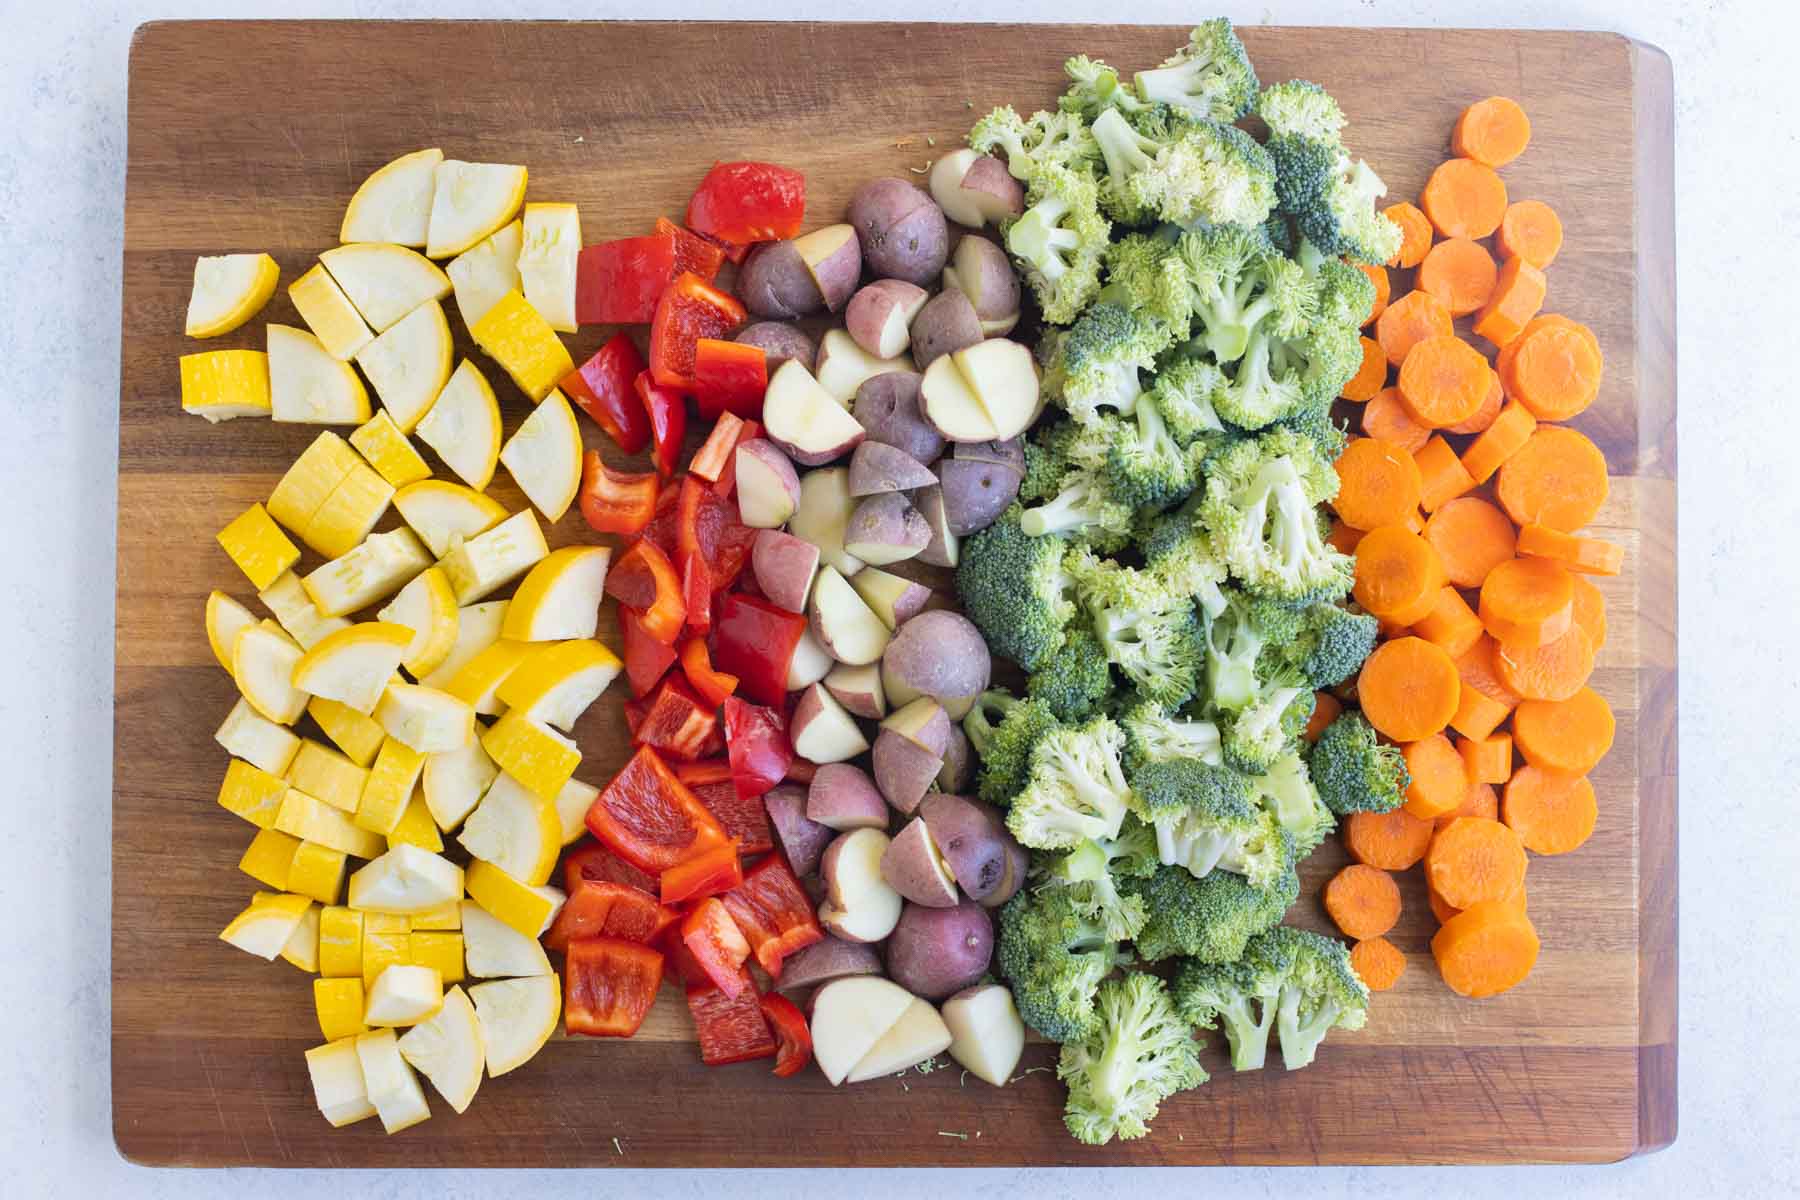 Vegetables are chopped into bite-sized pieces.